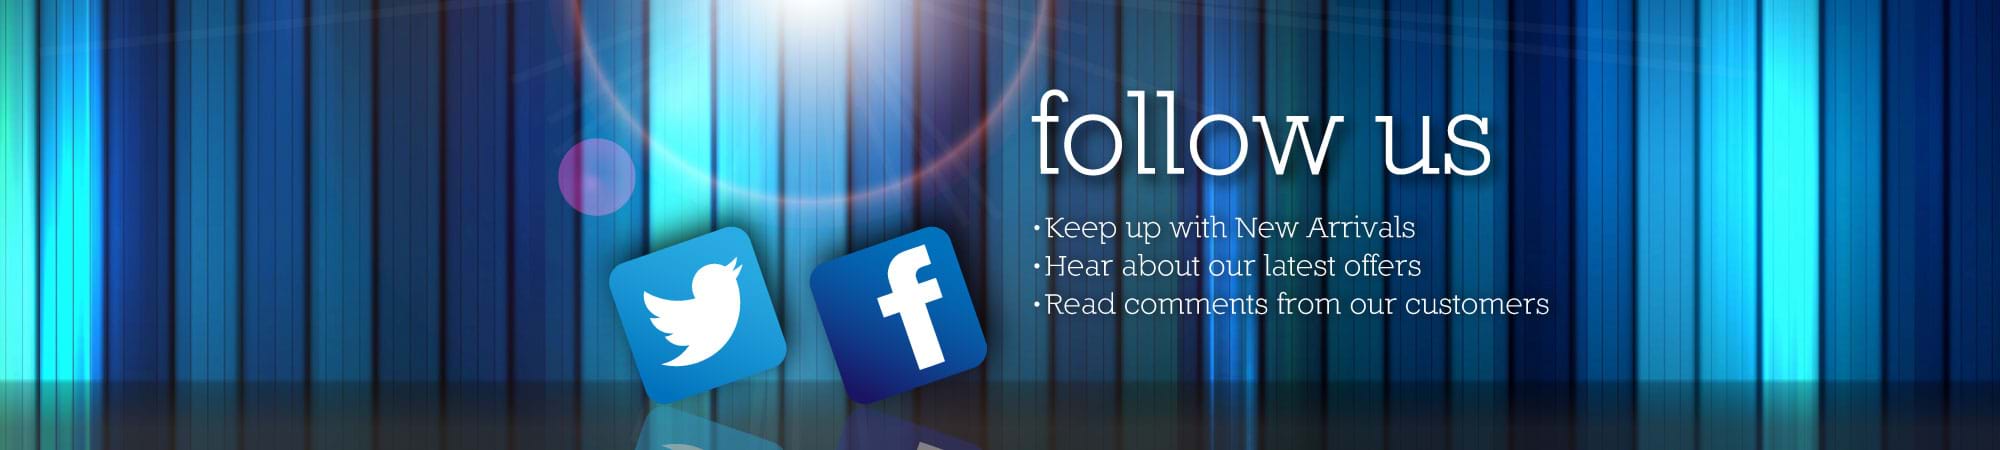 Follow Sixers Group on Twitter and Facebook